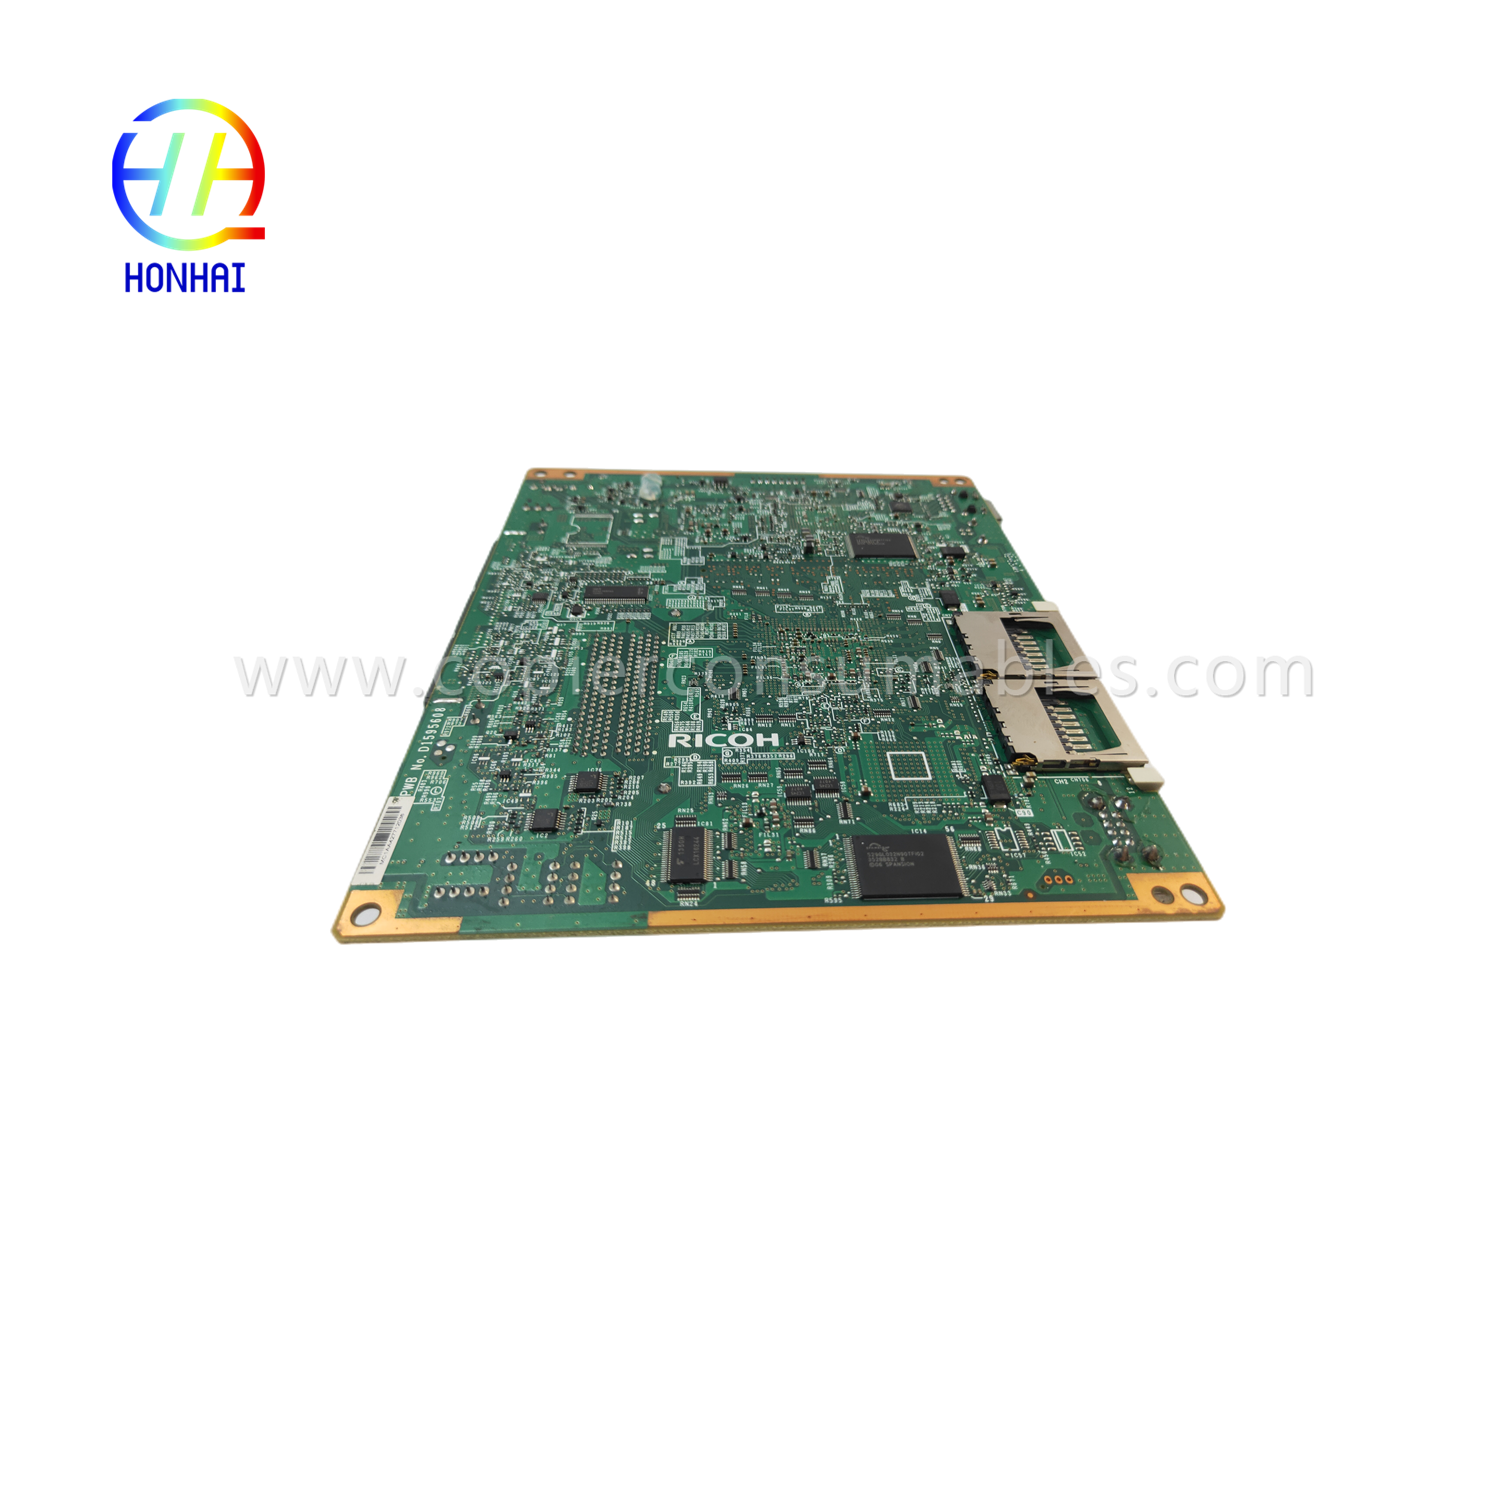 https://c585.goodao.net/motherboard-for-lenovo-thinkcentre-m72e-lga-1155-03t8193-system-board-product/